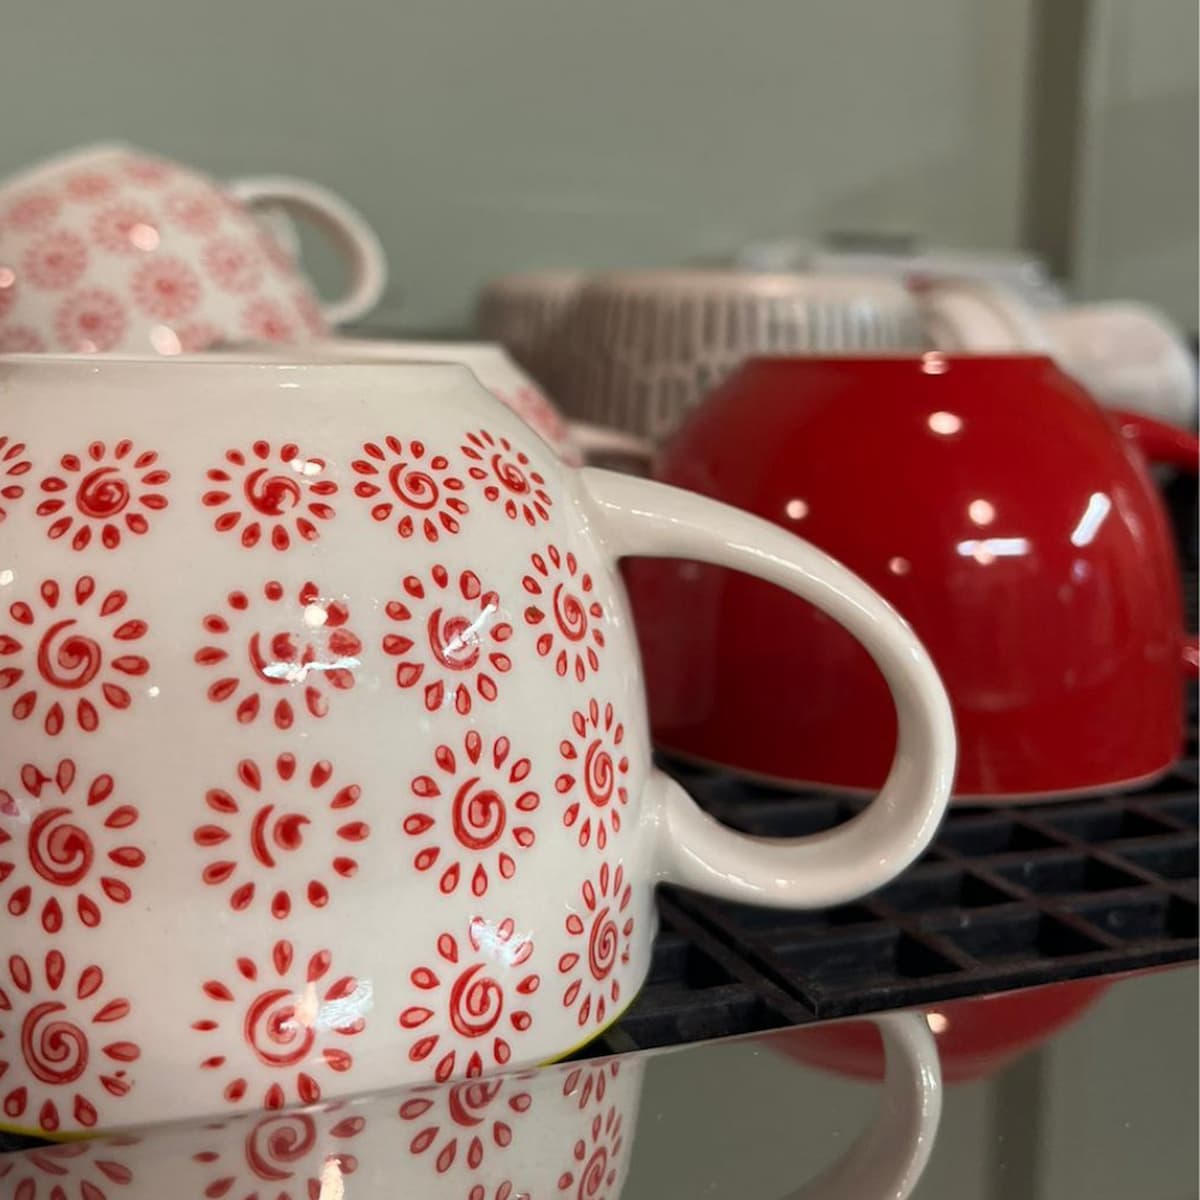 Clean red and white patterned coffee cups at Understated coffee shop.